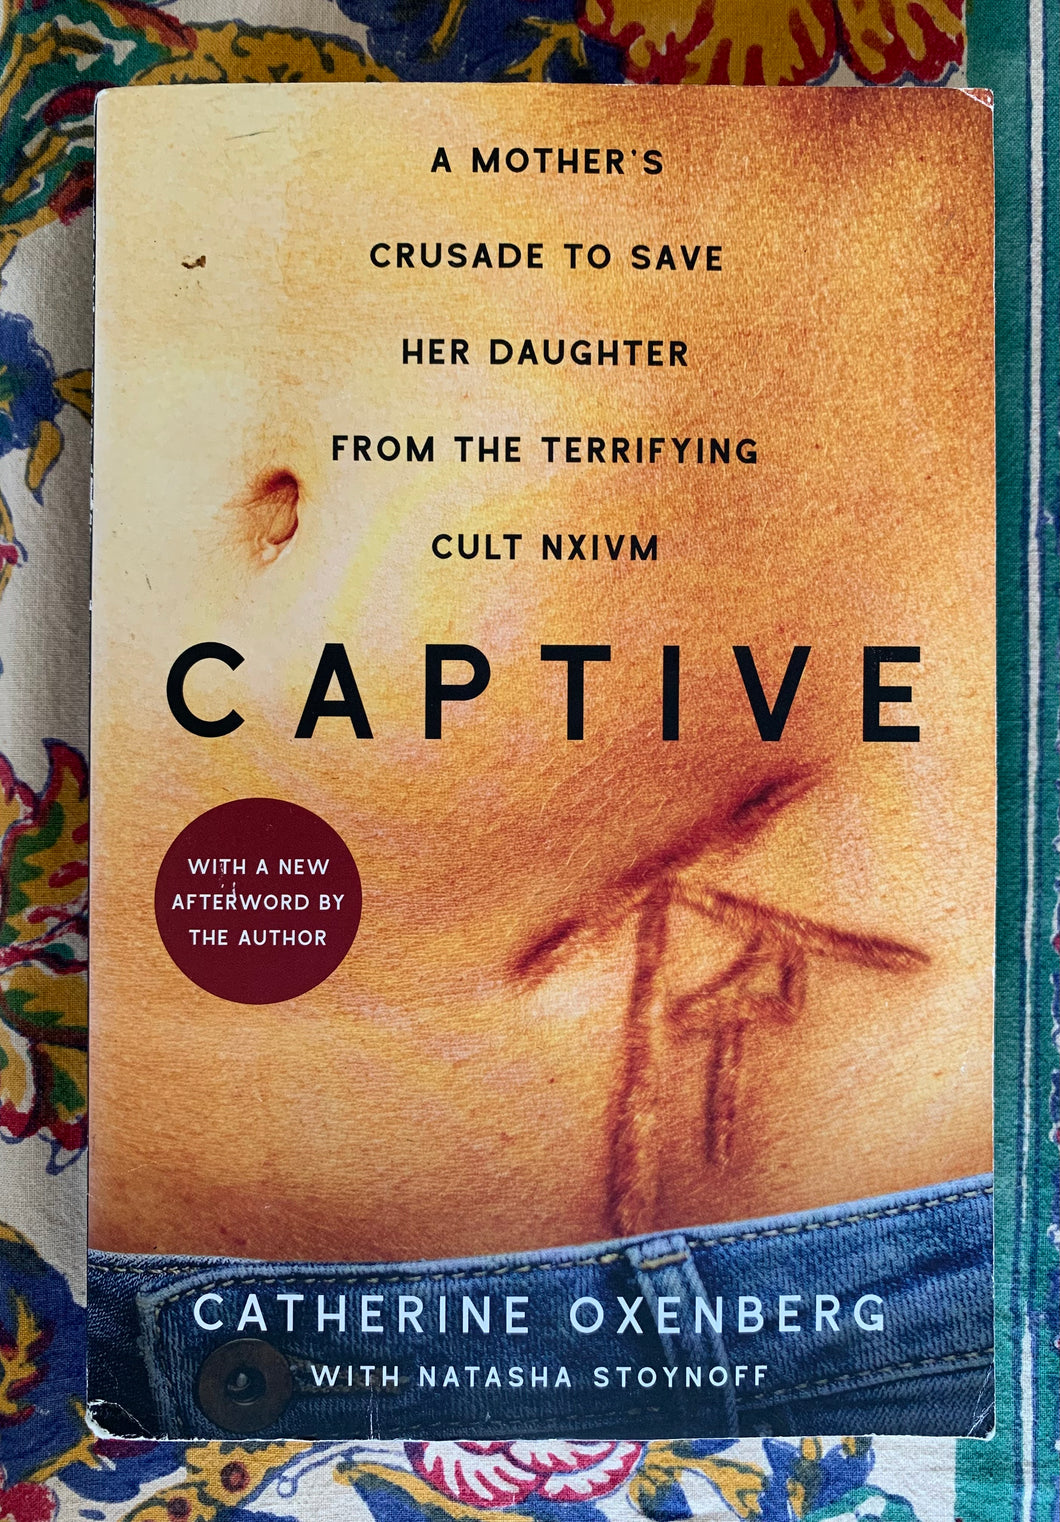 Captive: A Mother's Crusade to Save her Daughter from the Terrifying Cult NXIVM